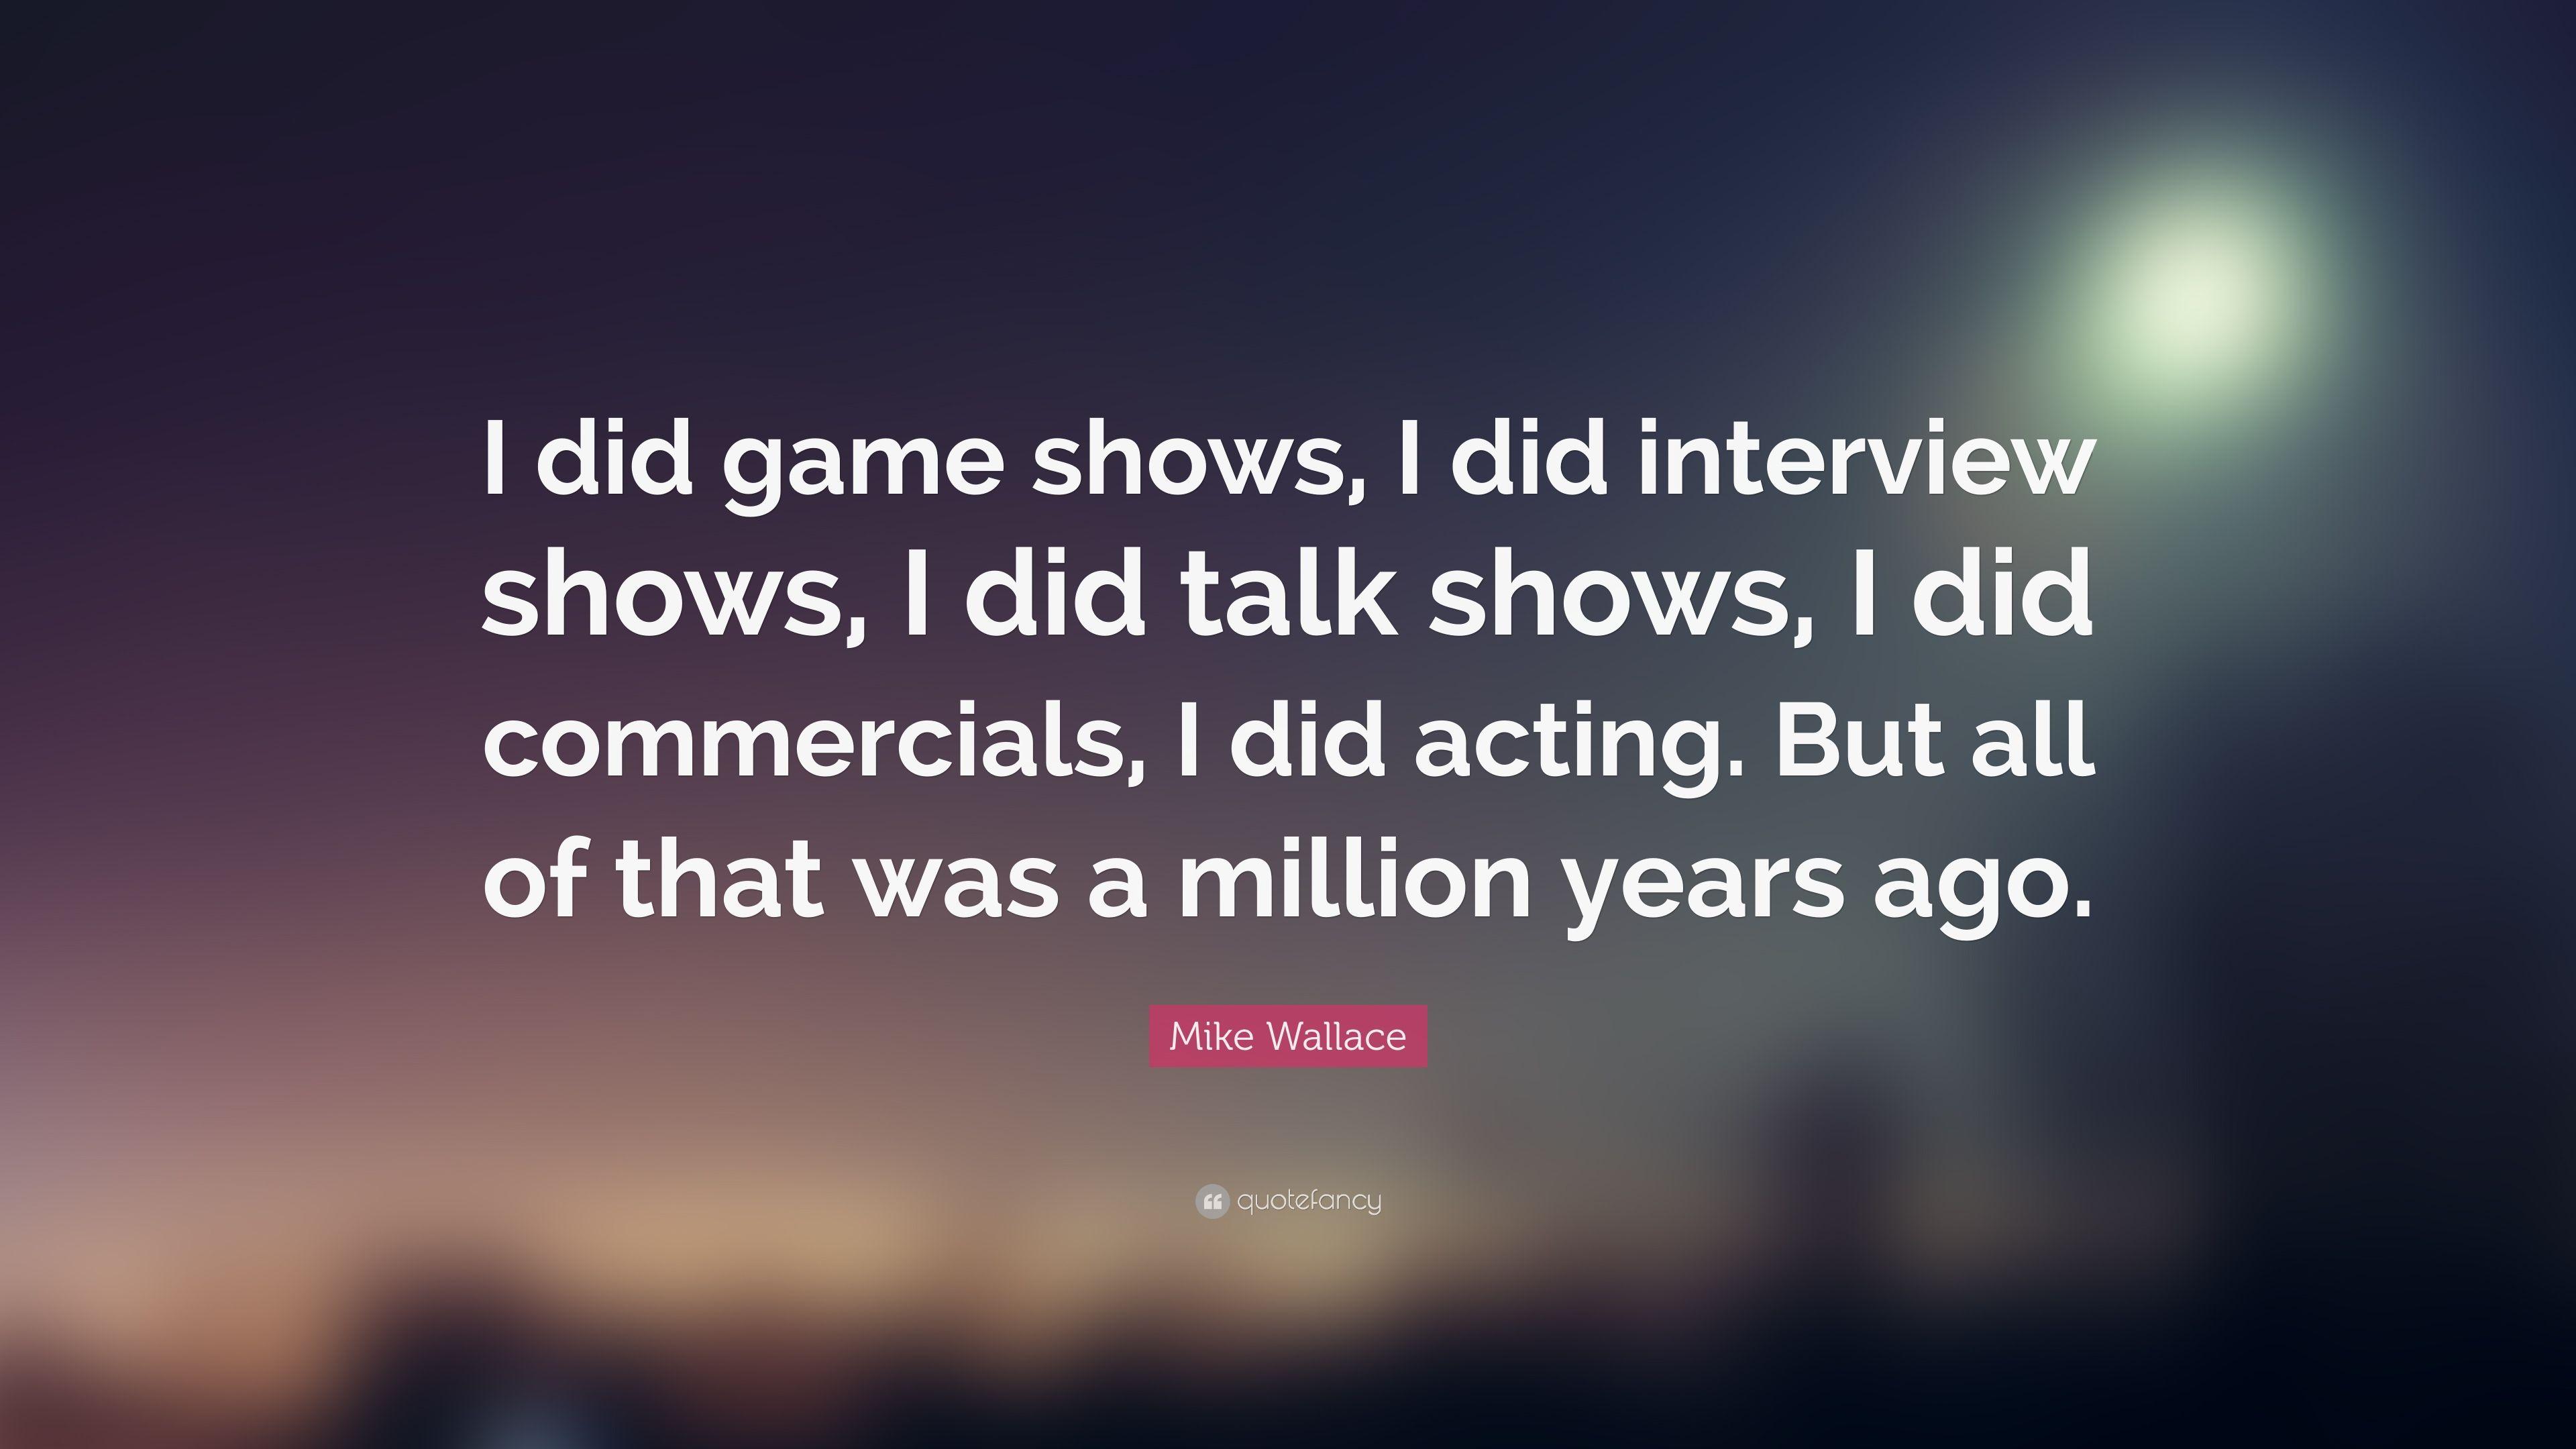 Mike Wallace Quote: “I did game shows, I did interview shows, I